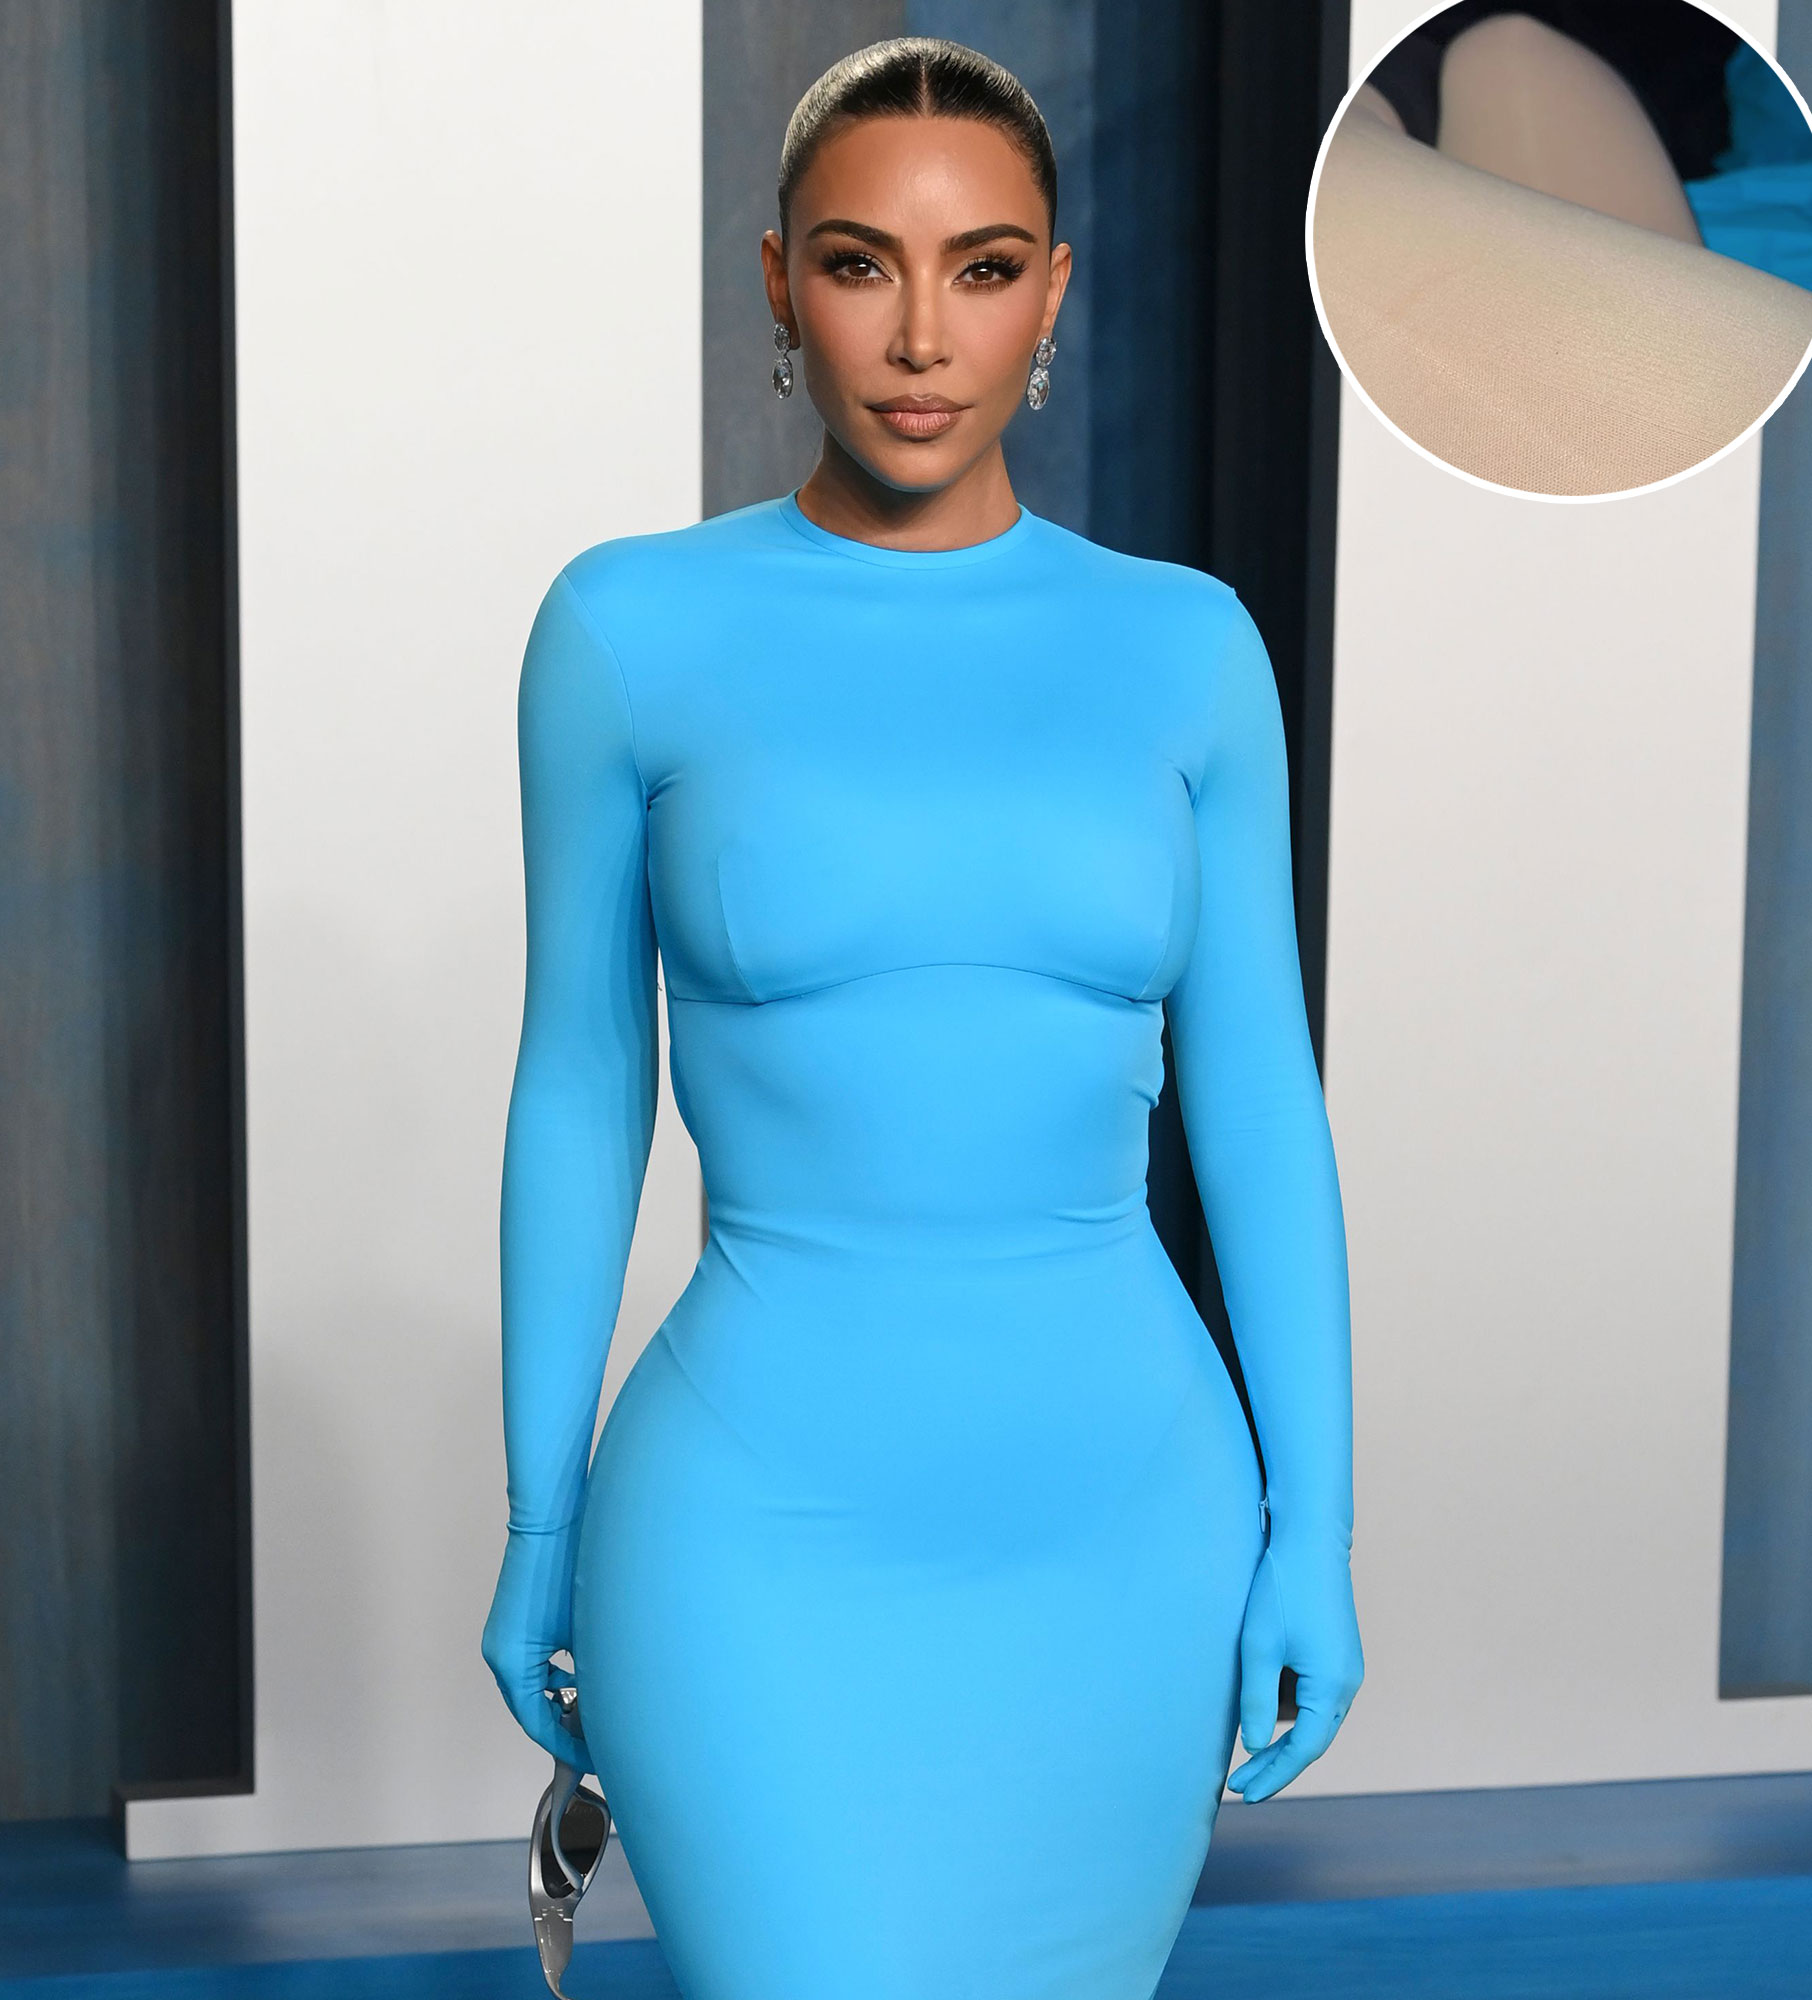 Kim Kardashian Just Flaunted Her Incredible Curves In A High-Cut Bodysuit—It's  SO Revealing! - SHEfinds